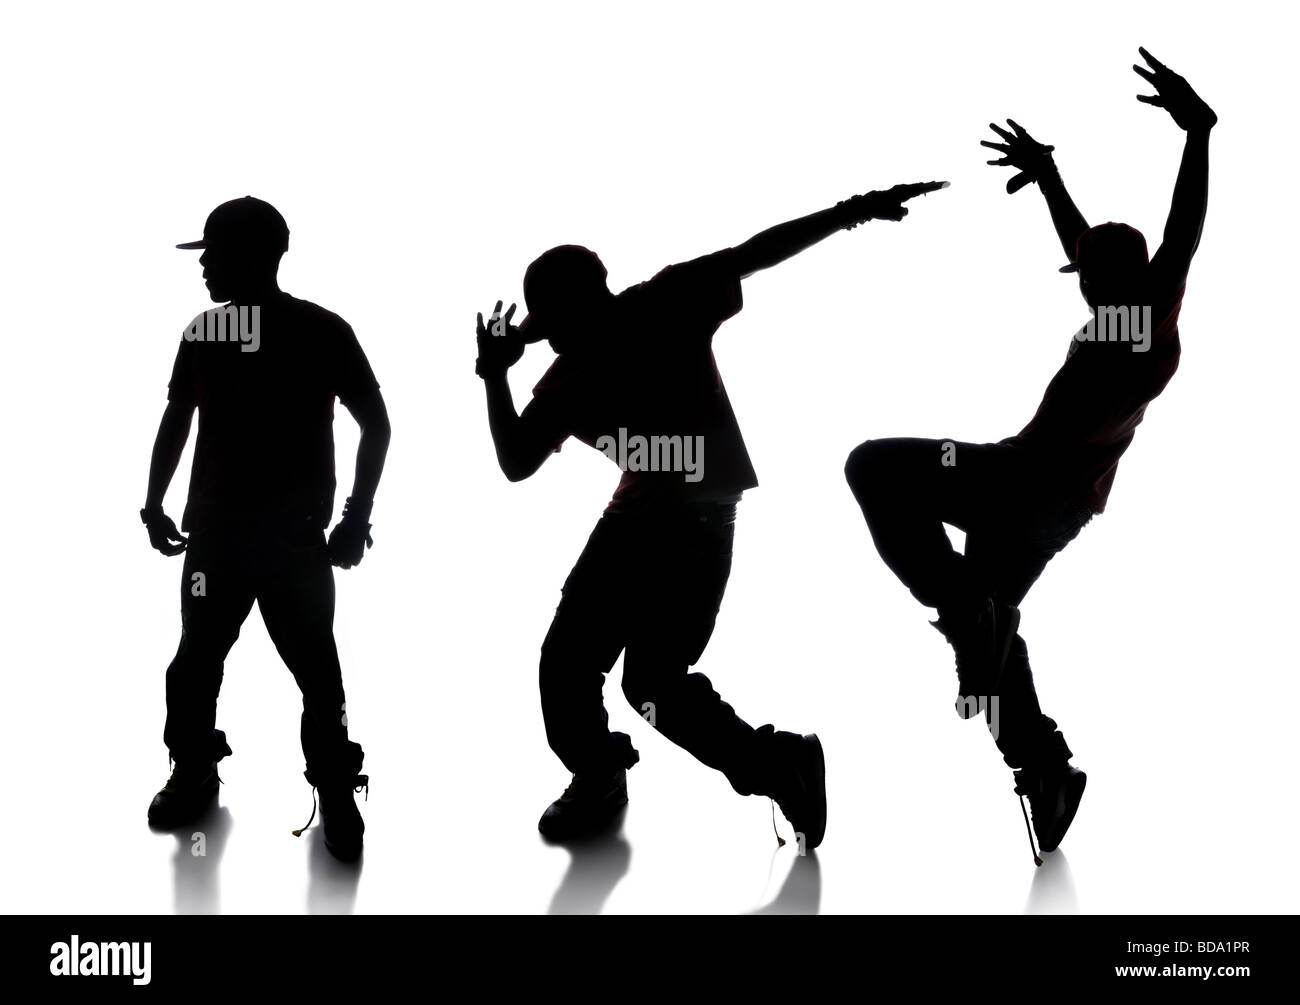 Silhouette of sequence of hip hop dancer over a white background Stock Photo